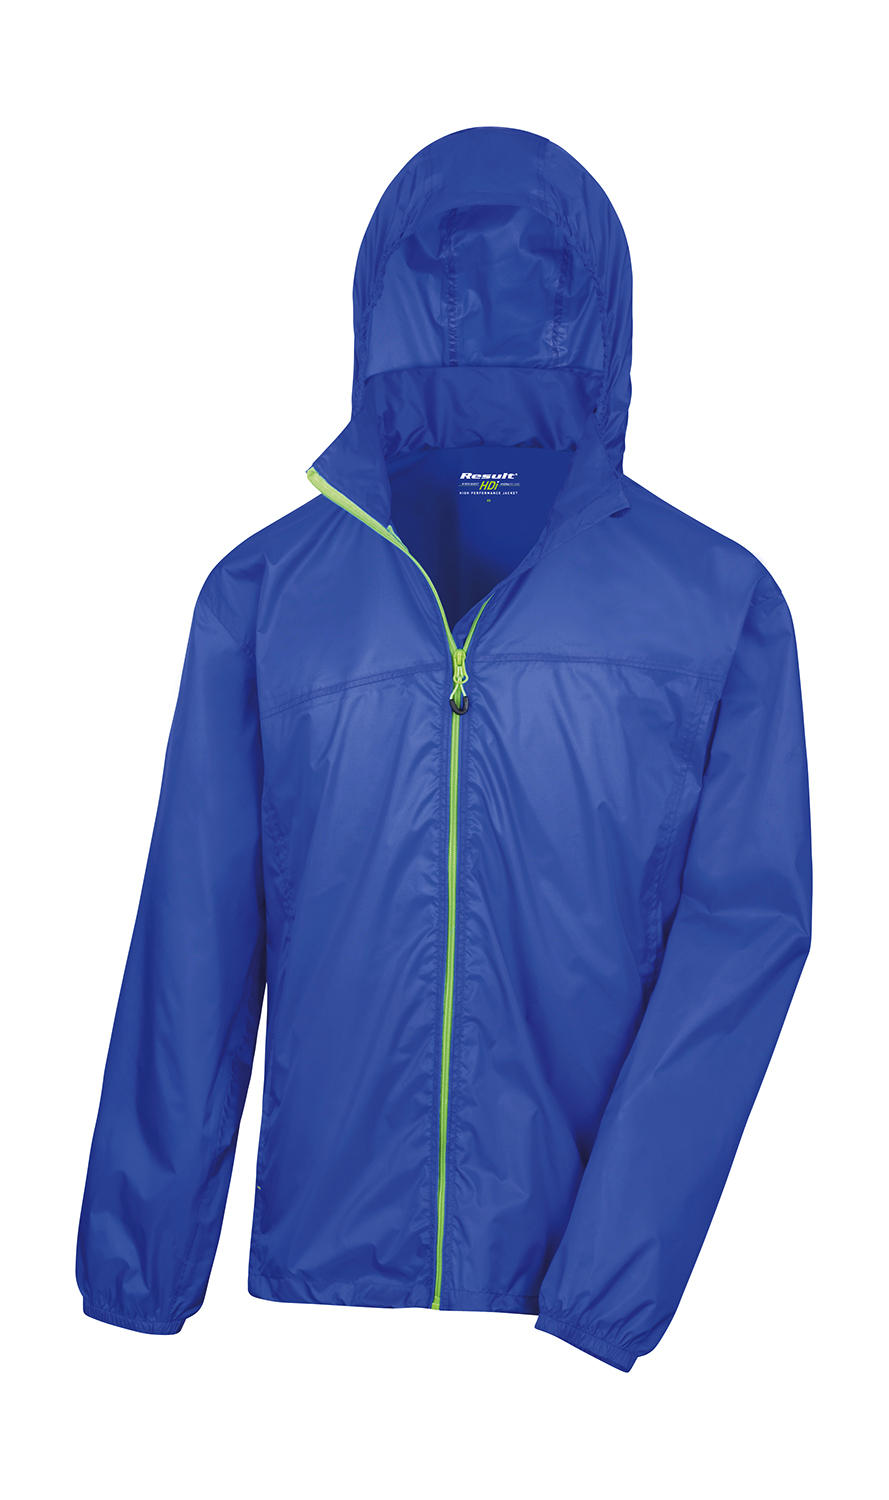  HDI Quest Lightweight Stowable Jacket in Farbe Royal/Lime